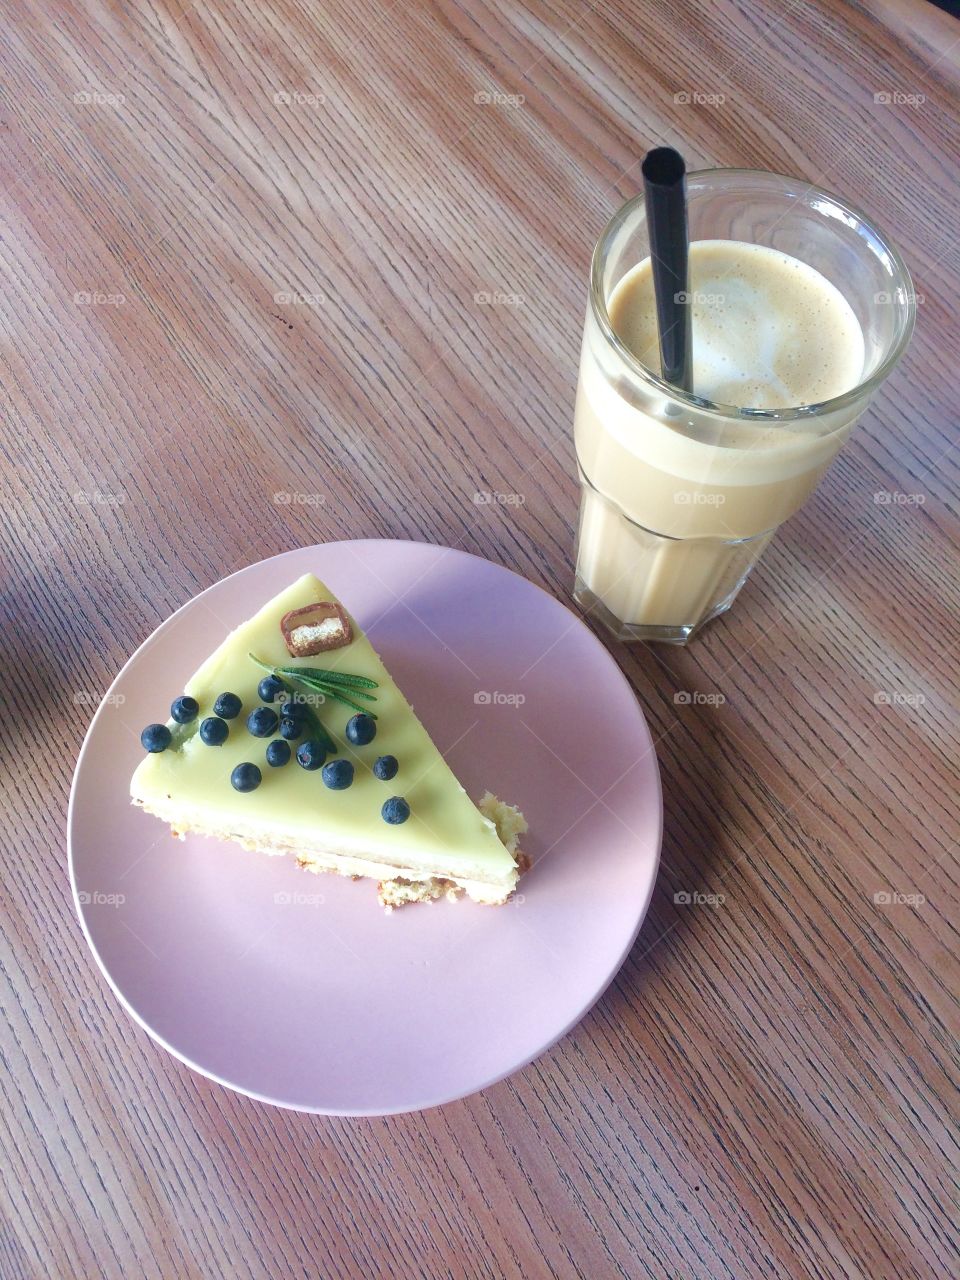 Pistachio and rosemary  cake + double latte